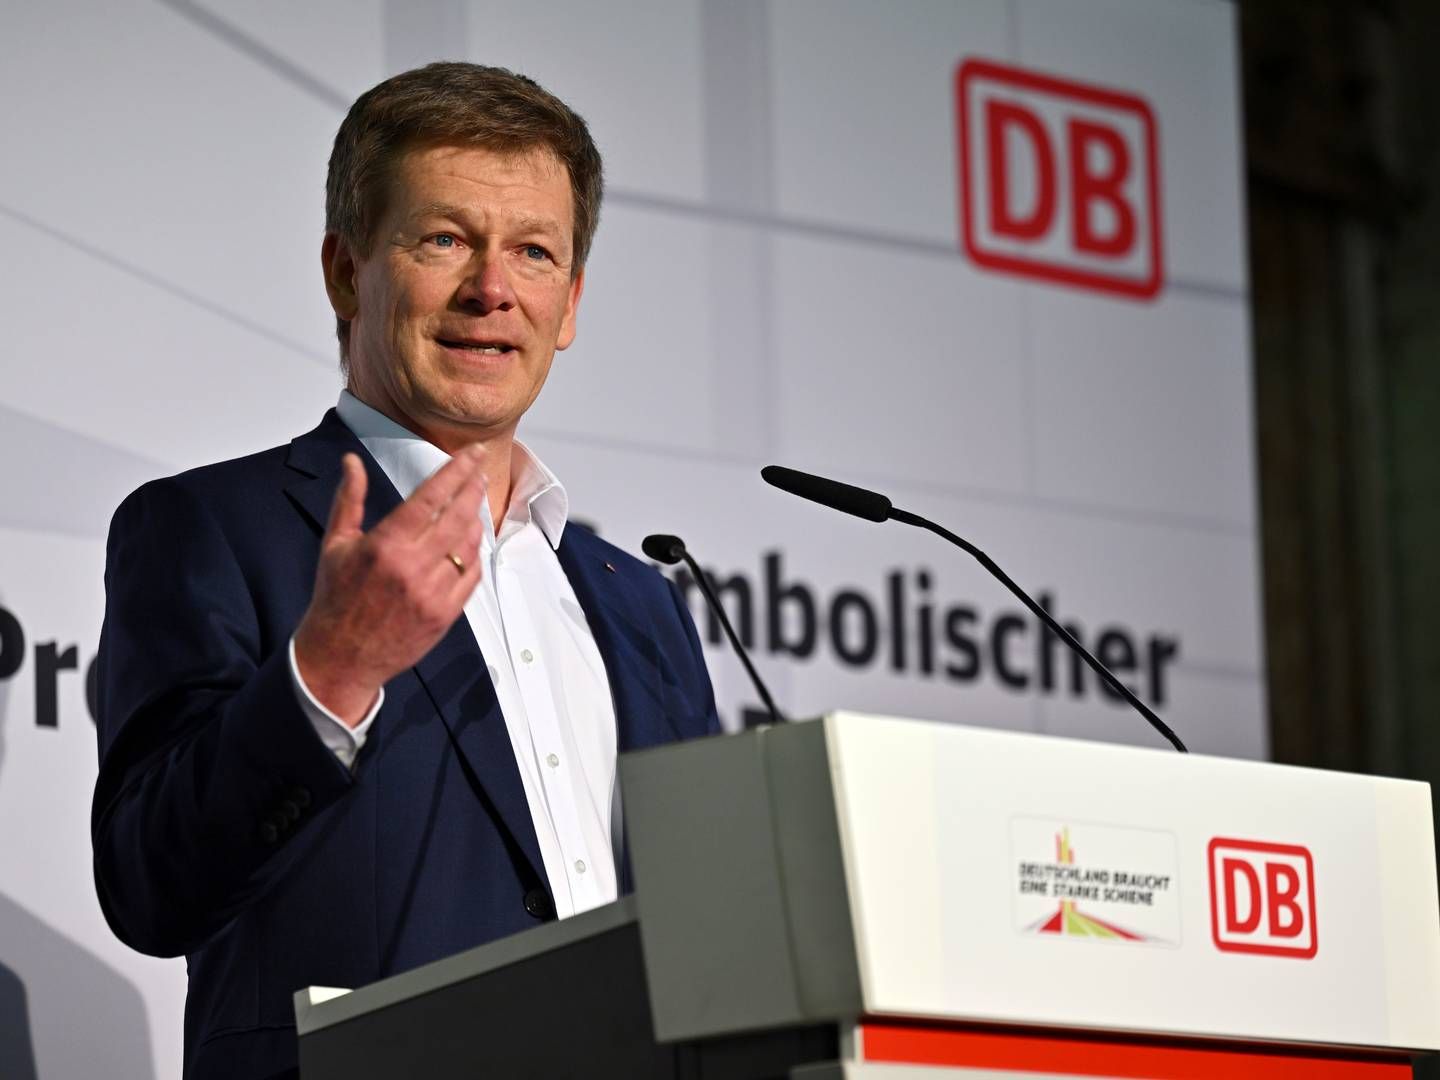 DB Schenker is owned by the state-owned railroad group Deutsche Bahn with Richard Lutz as CEO.